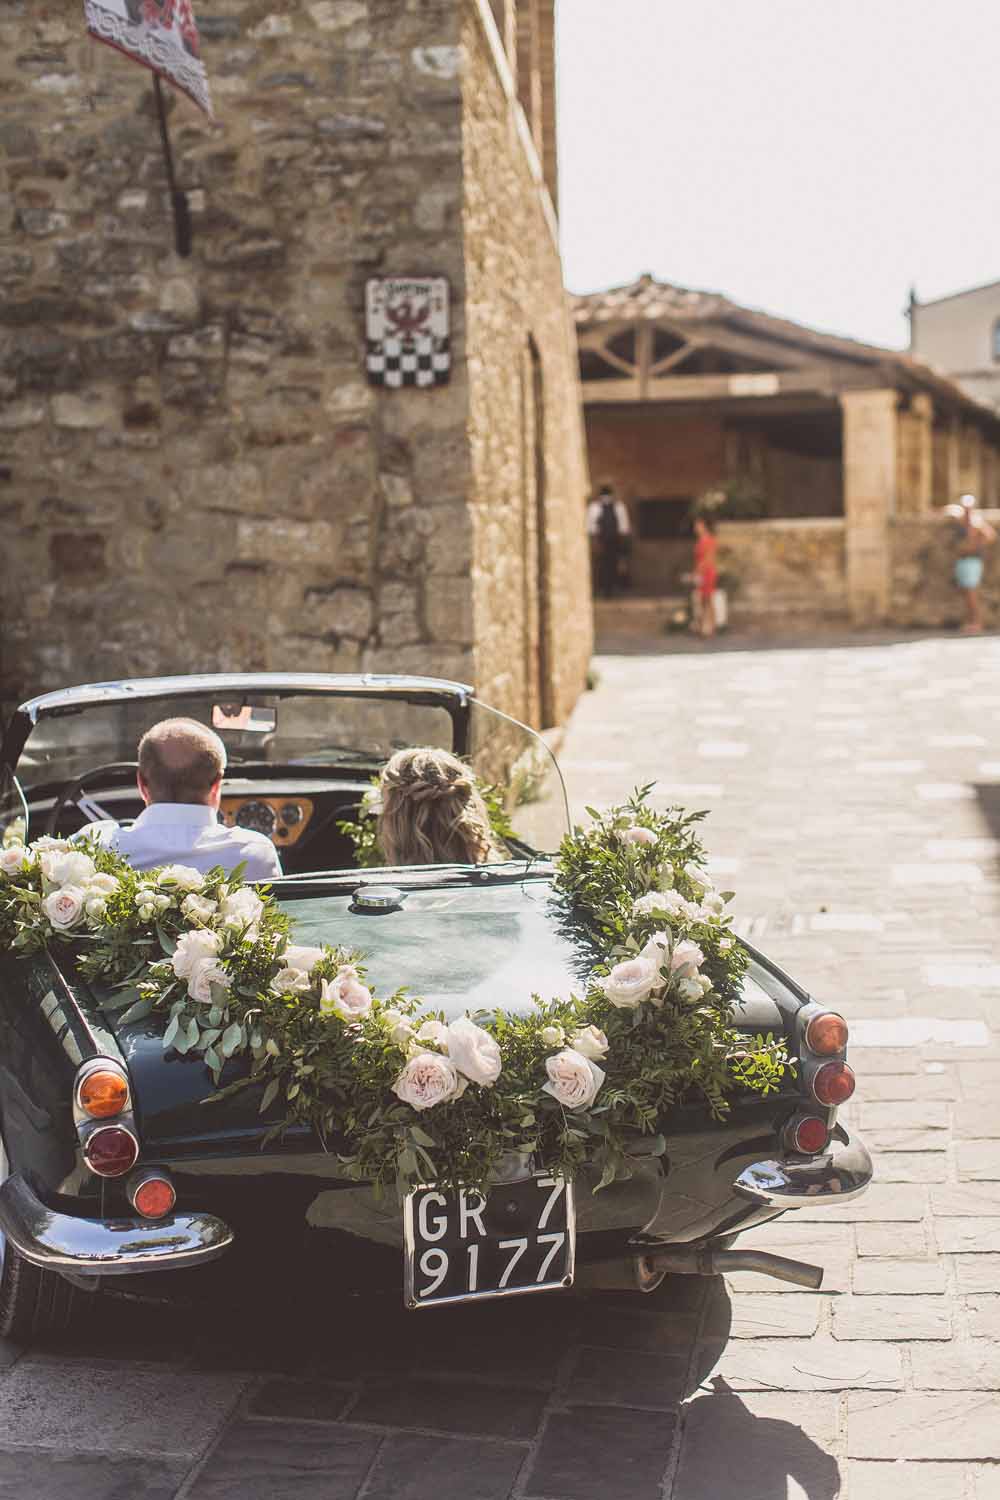 Wedding car floral garland by Passion for Flowers destination wedding Tuscany